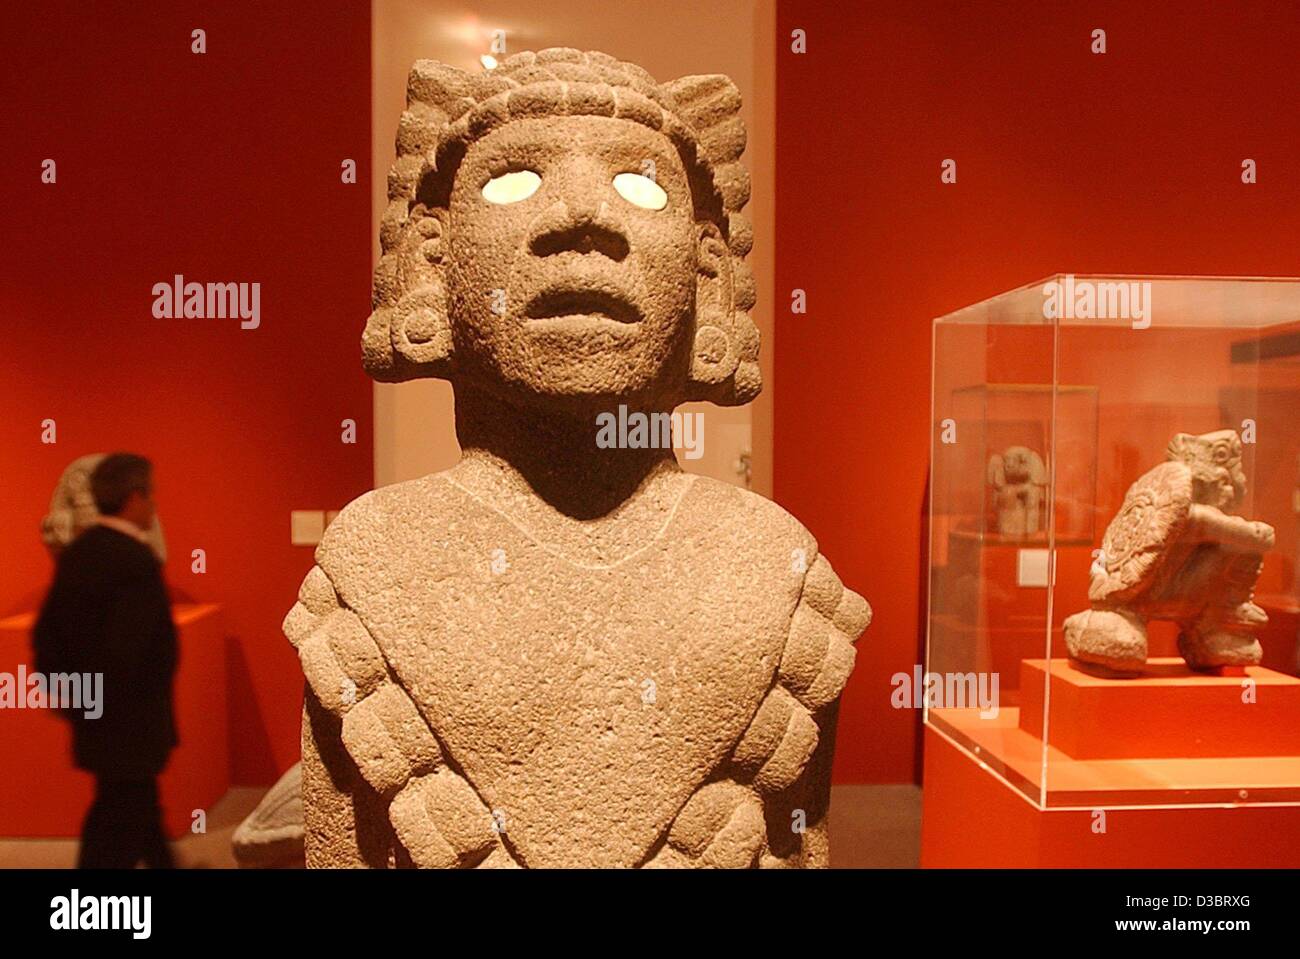 (dpa) - The clay figure of Teteo innan-Toci, the mother of Gods, dating from 1500, is displayed at the Aztec arts exhibition at the Bundeskunsthalle in Bonn, Germany, 25 September 2003. About 350 pieces of art are shown in what is one of the biggest ever Aztec exhibition. The art represents the life Stock Photo